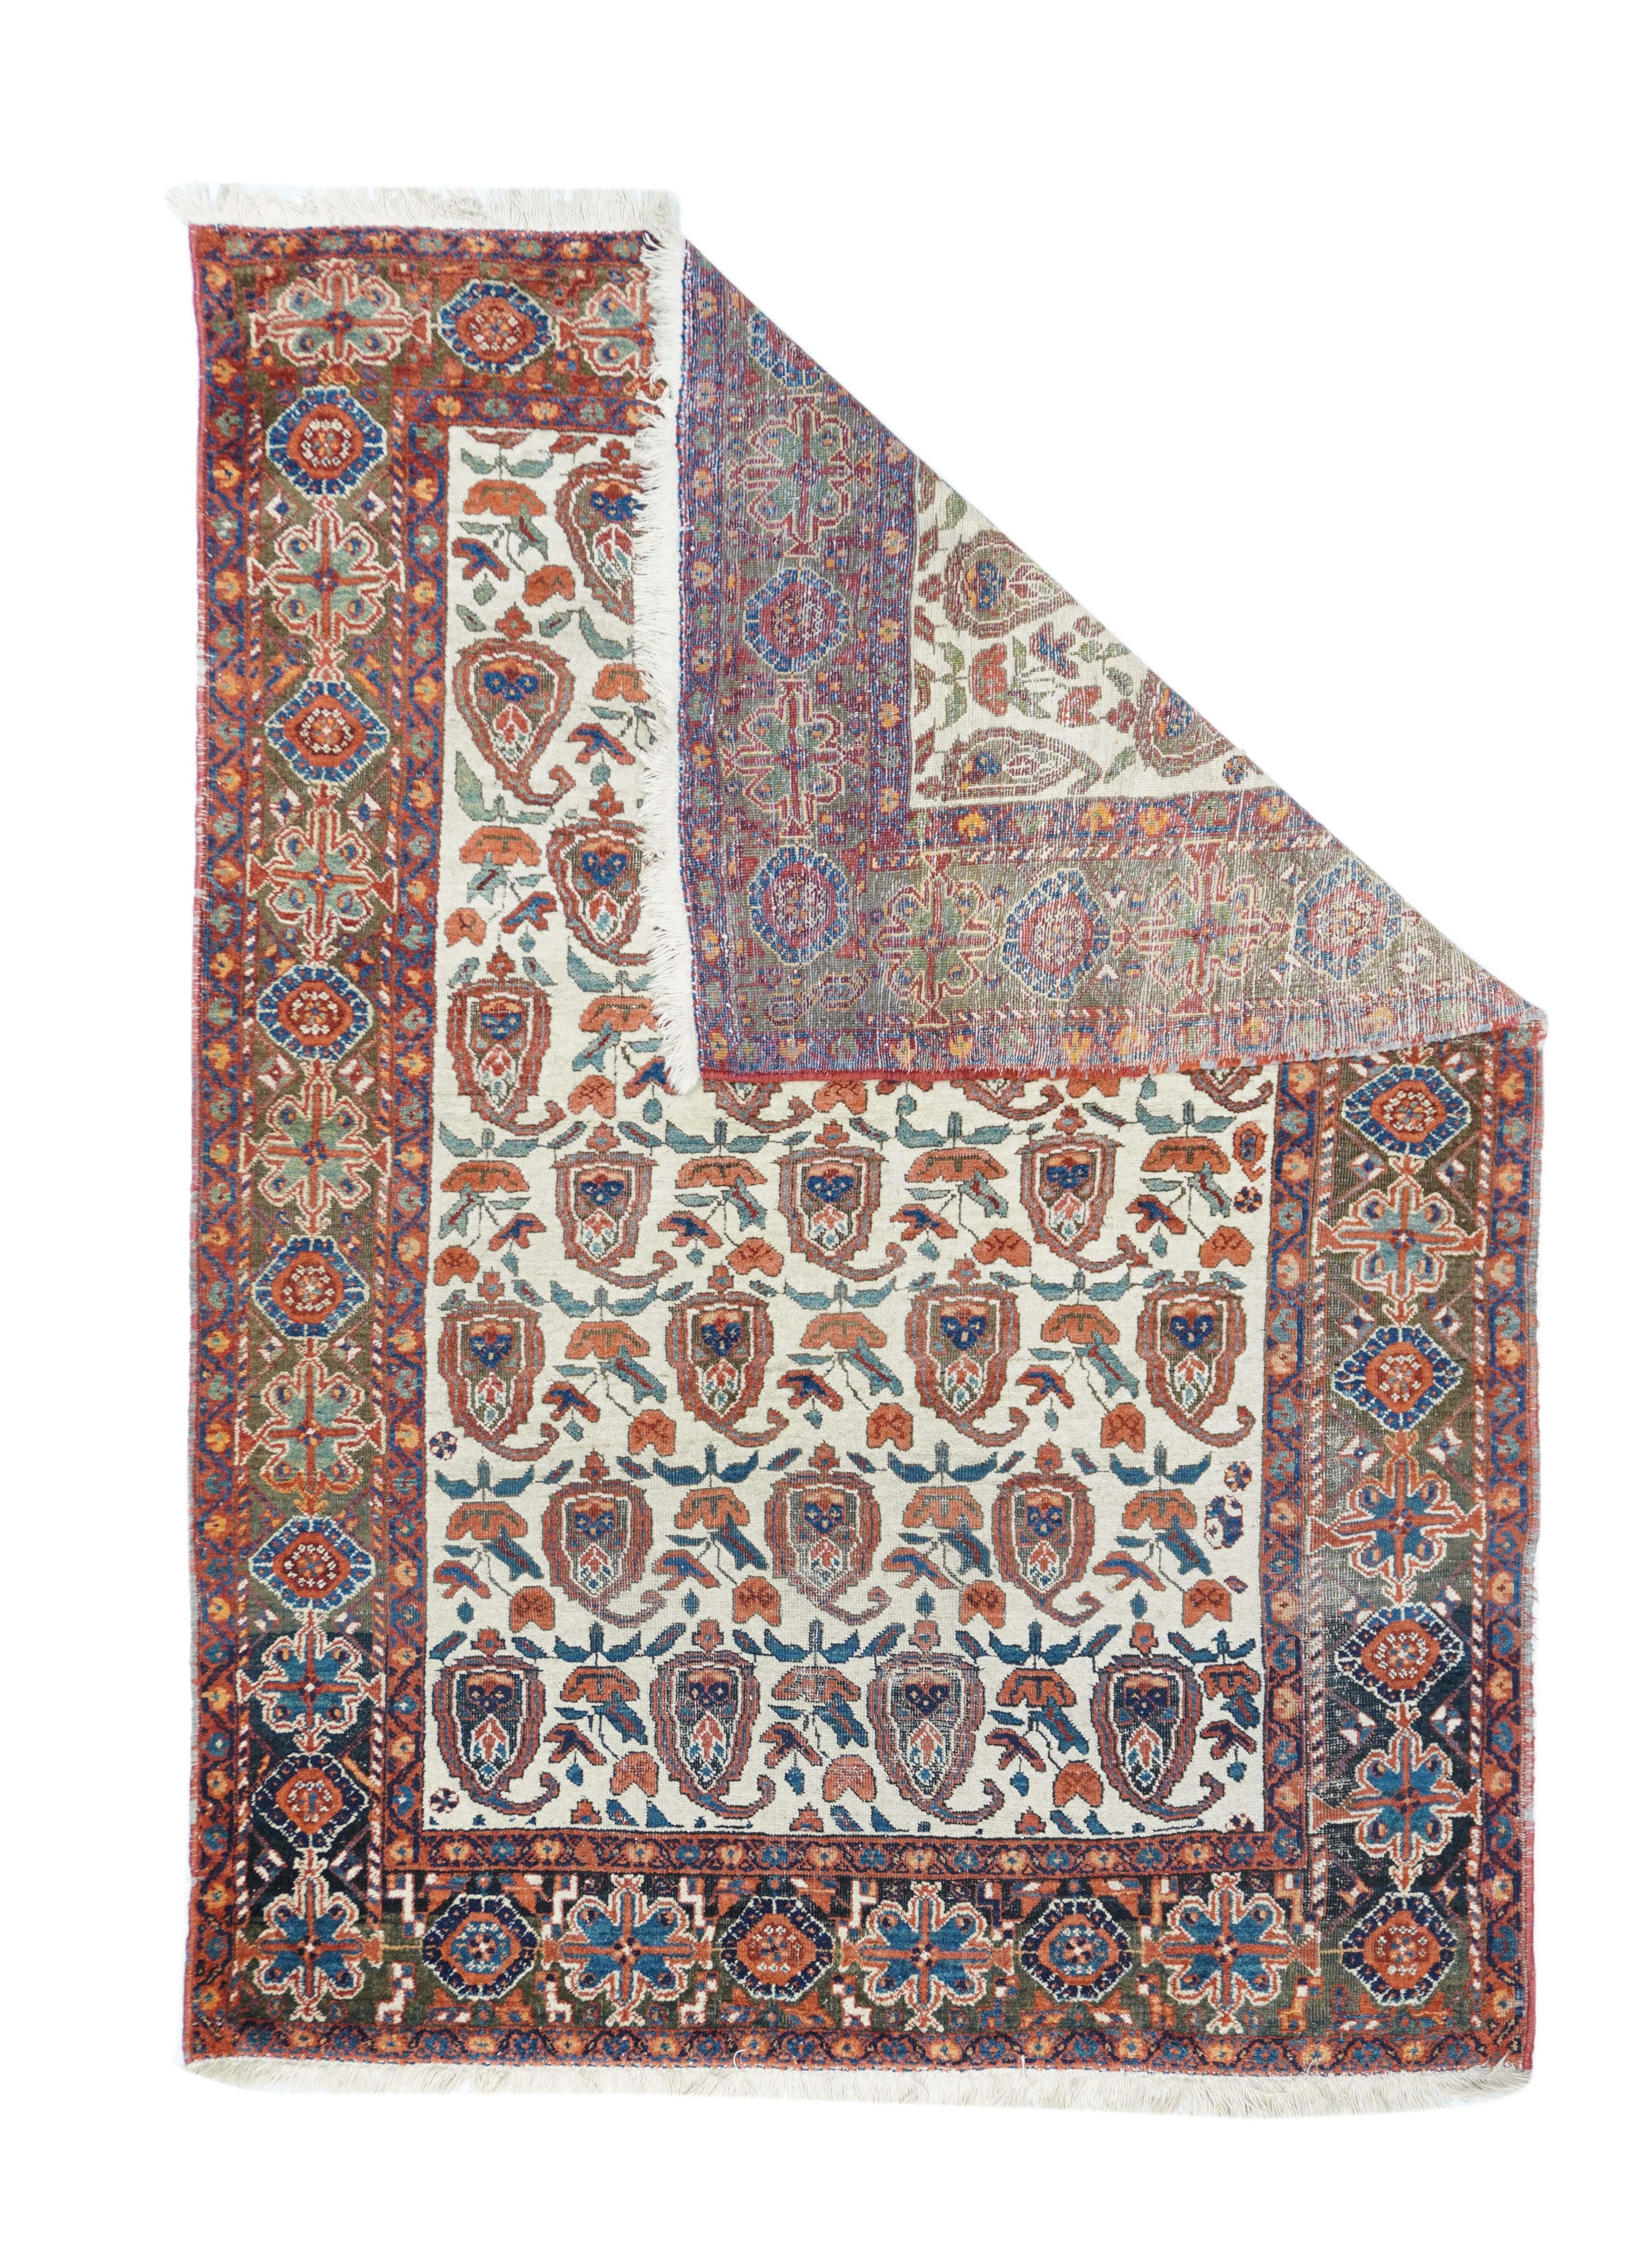 Antique Beige Afshar rug 4'4'' x 6'1''. The Afshar tribes of SE Persia are incredibly versatile, weaving nearly any pattern, in either knot type, with wool or cotton foundations. Here the natural old ivory field shows eight offset rows of leftward